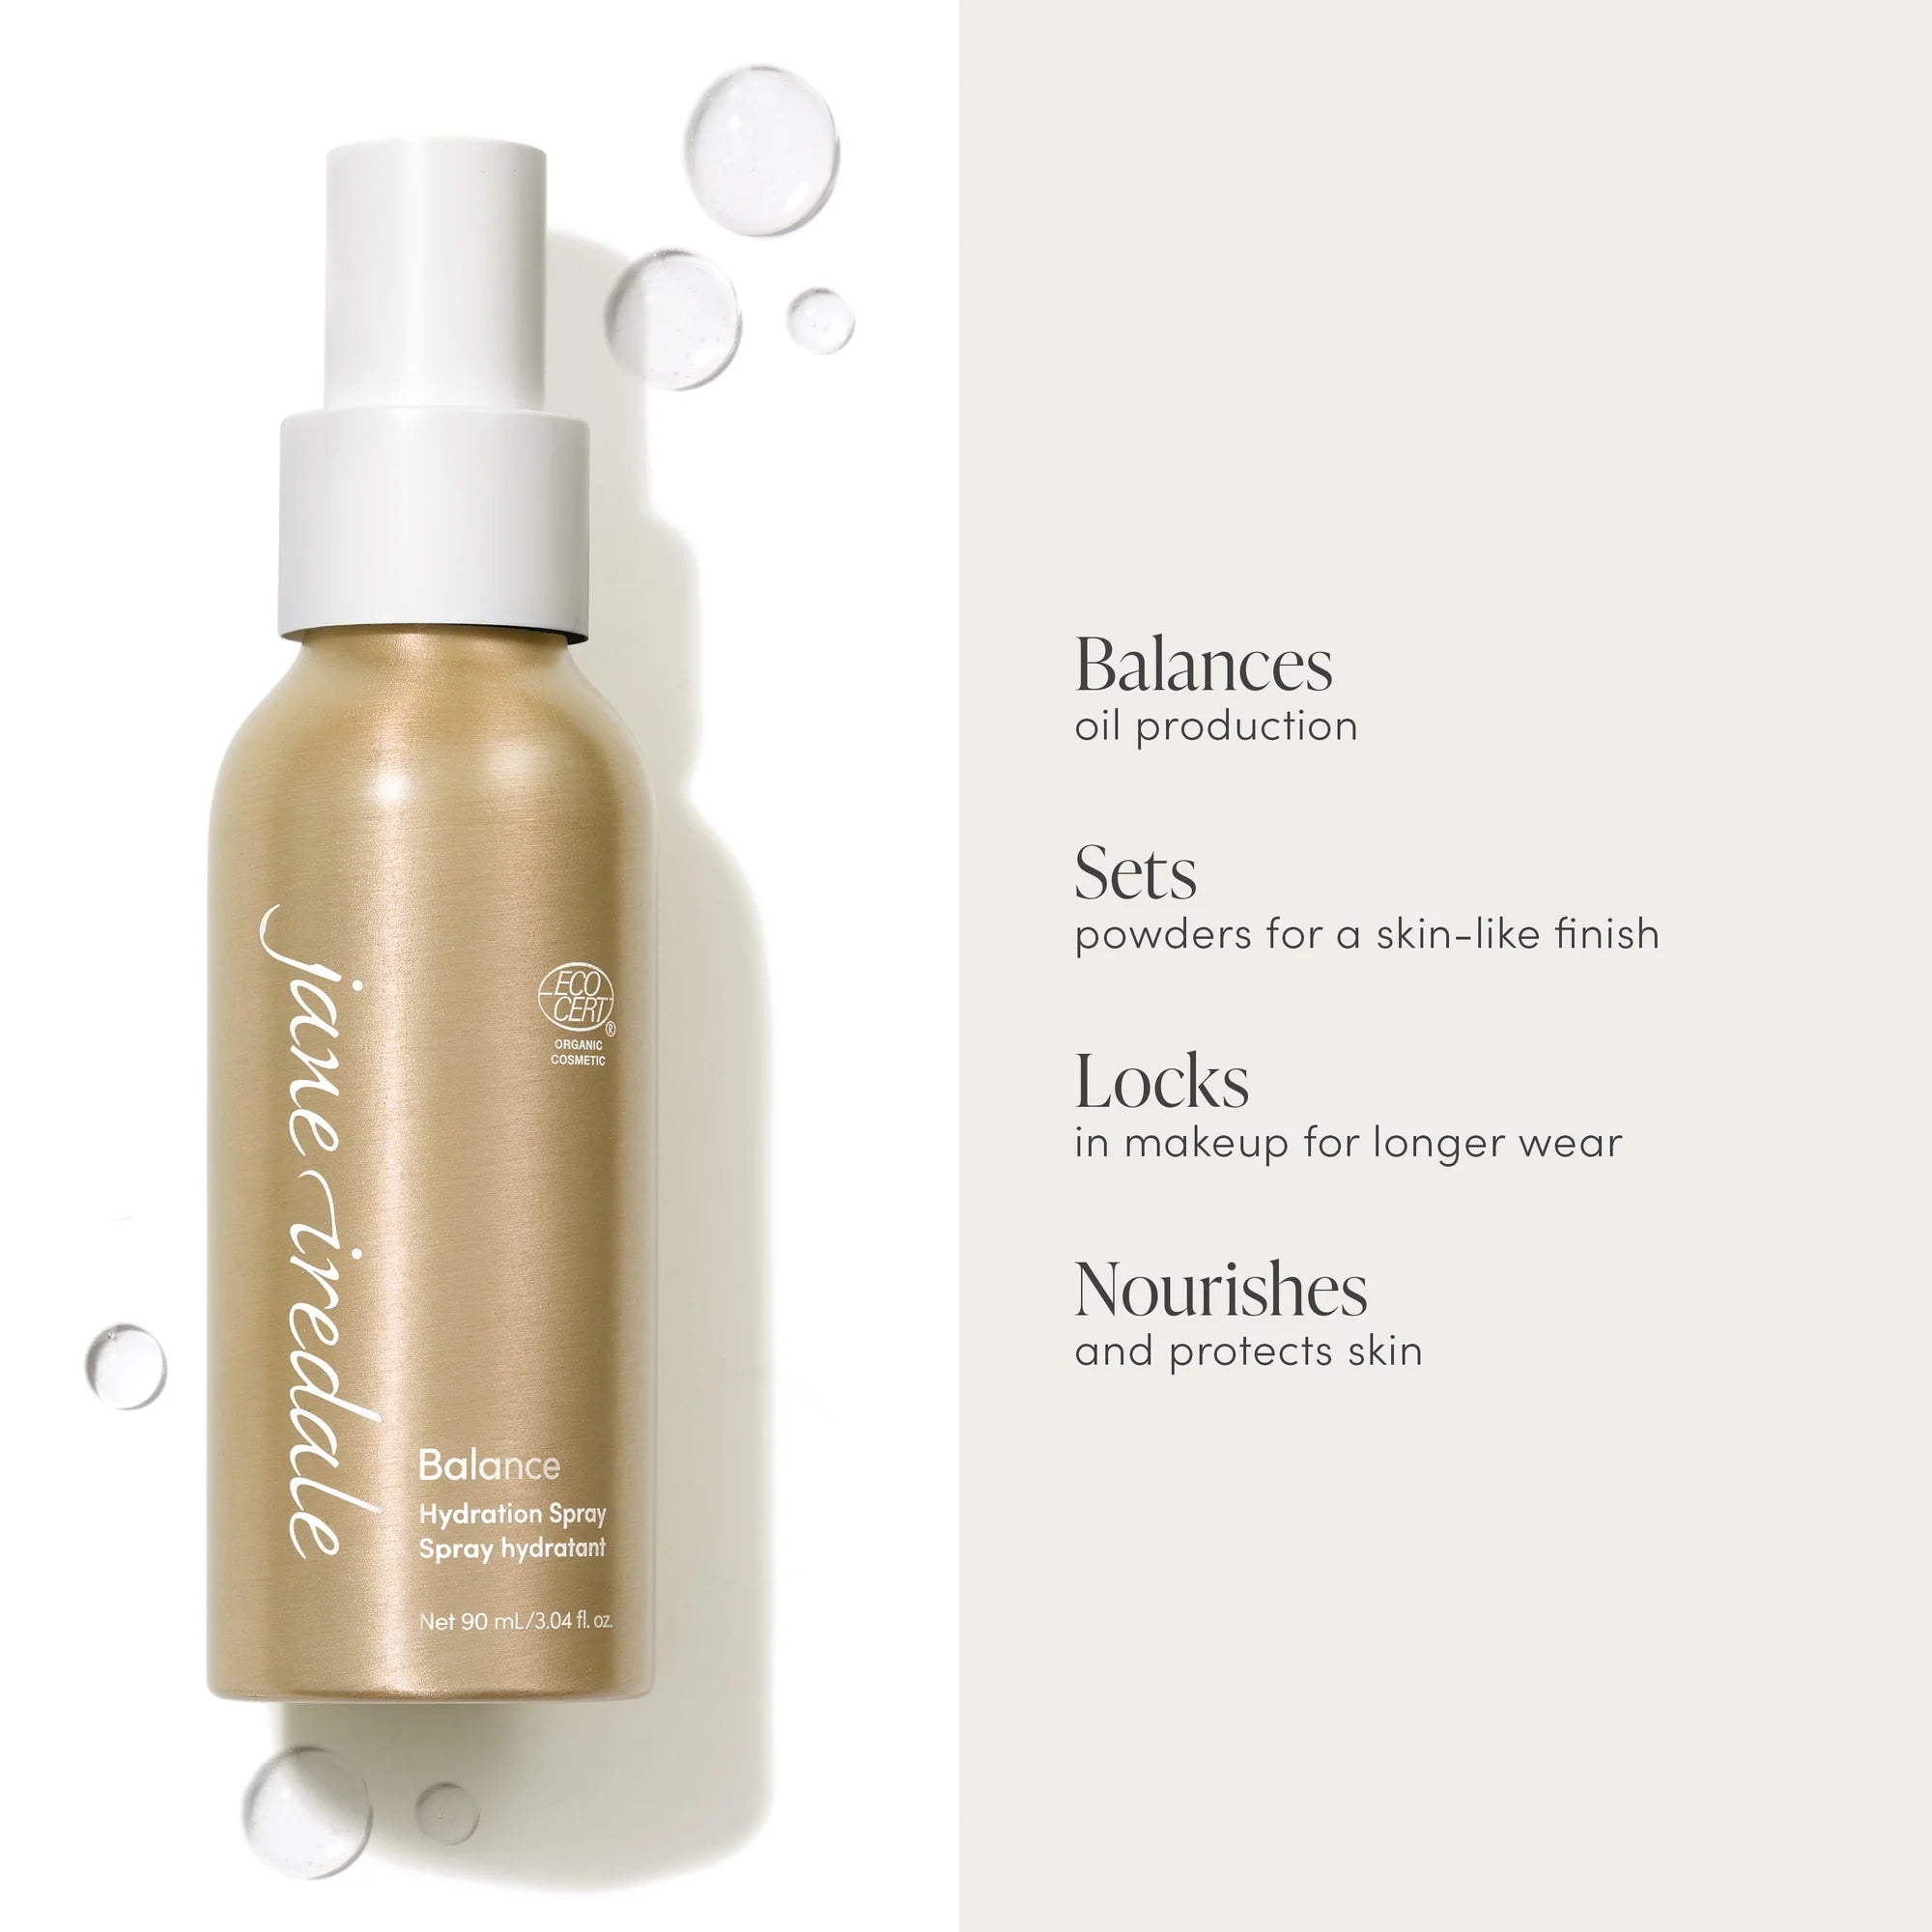 Jane Iredale's Balance™ Hydration Spray - Use to set mineral makeup foundation for a long-lasting, smooth finish